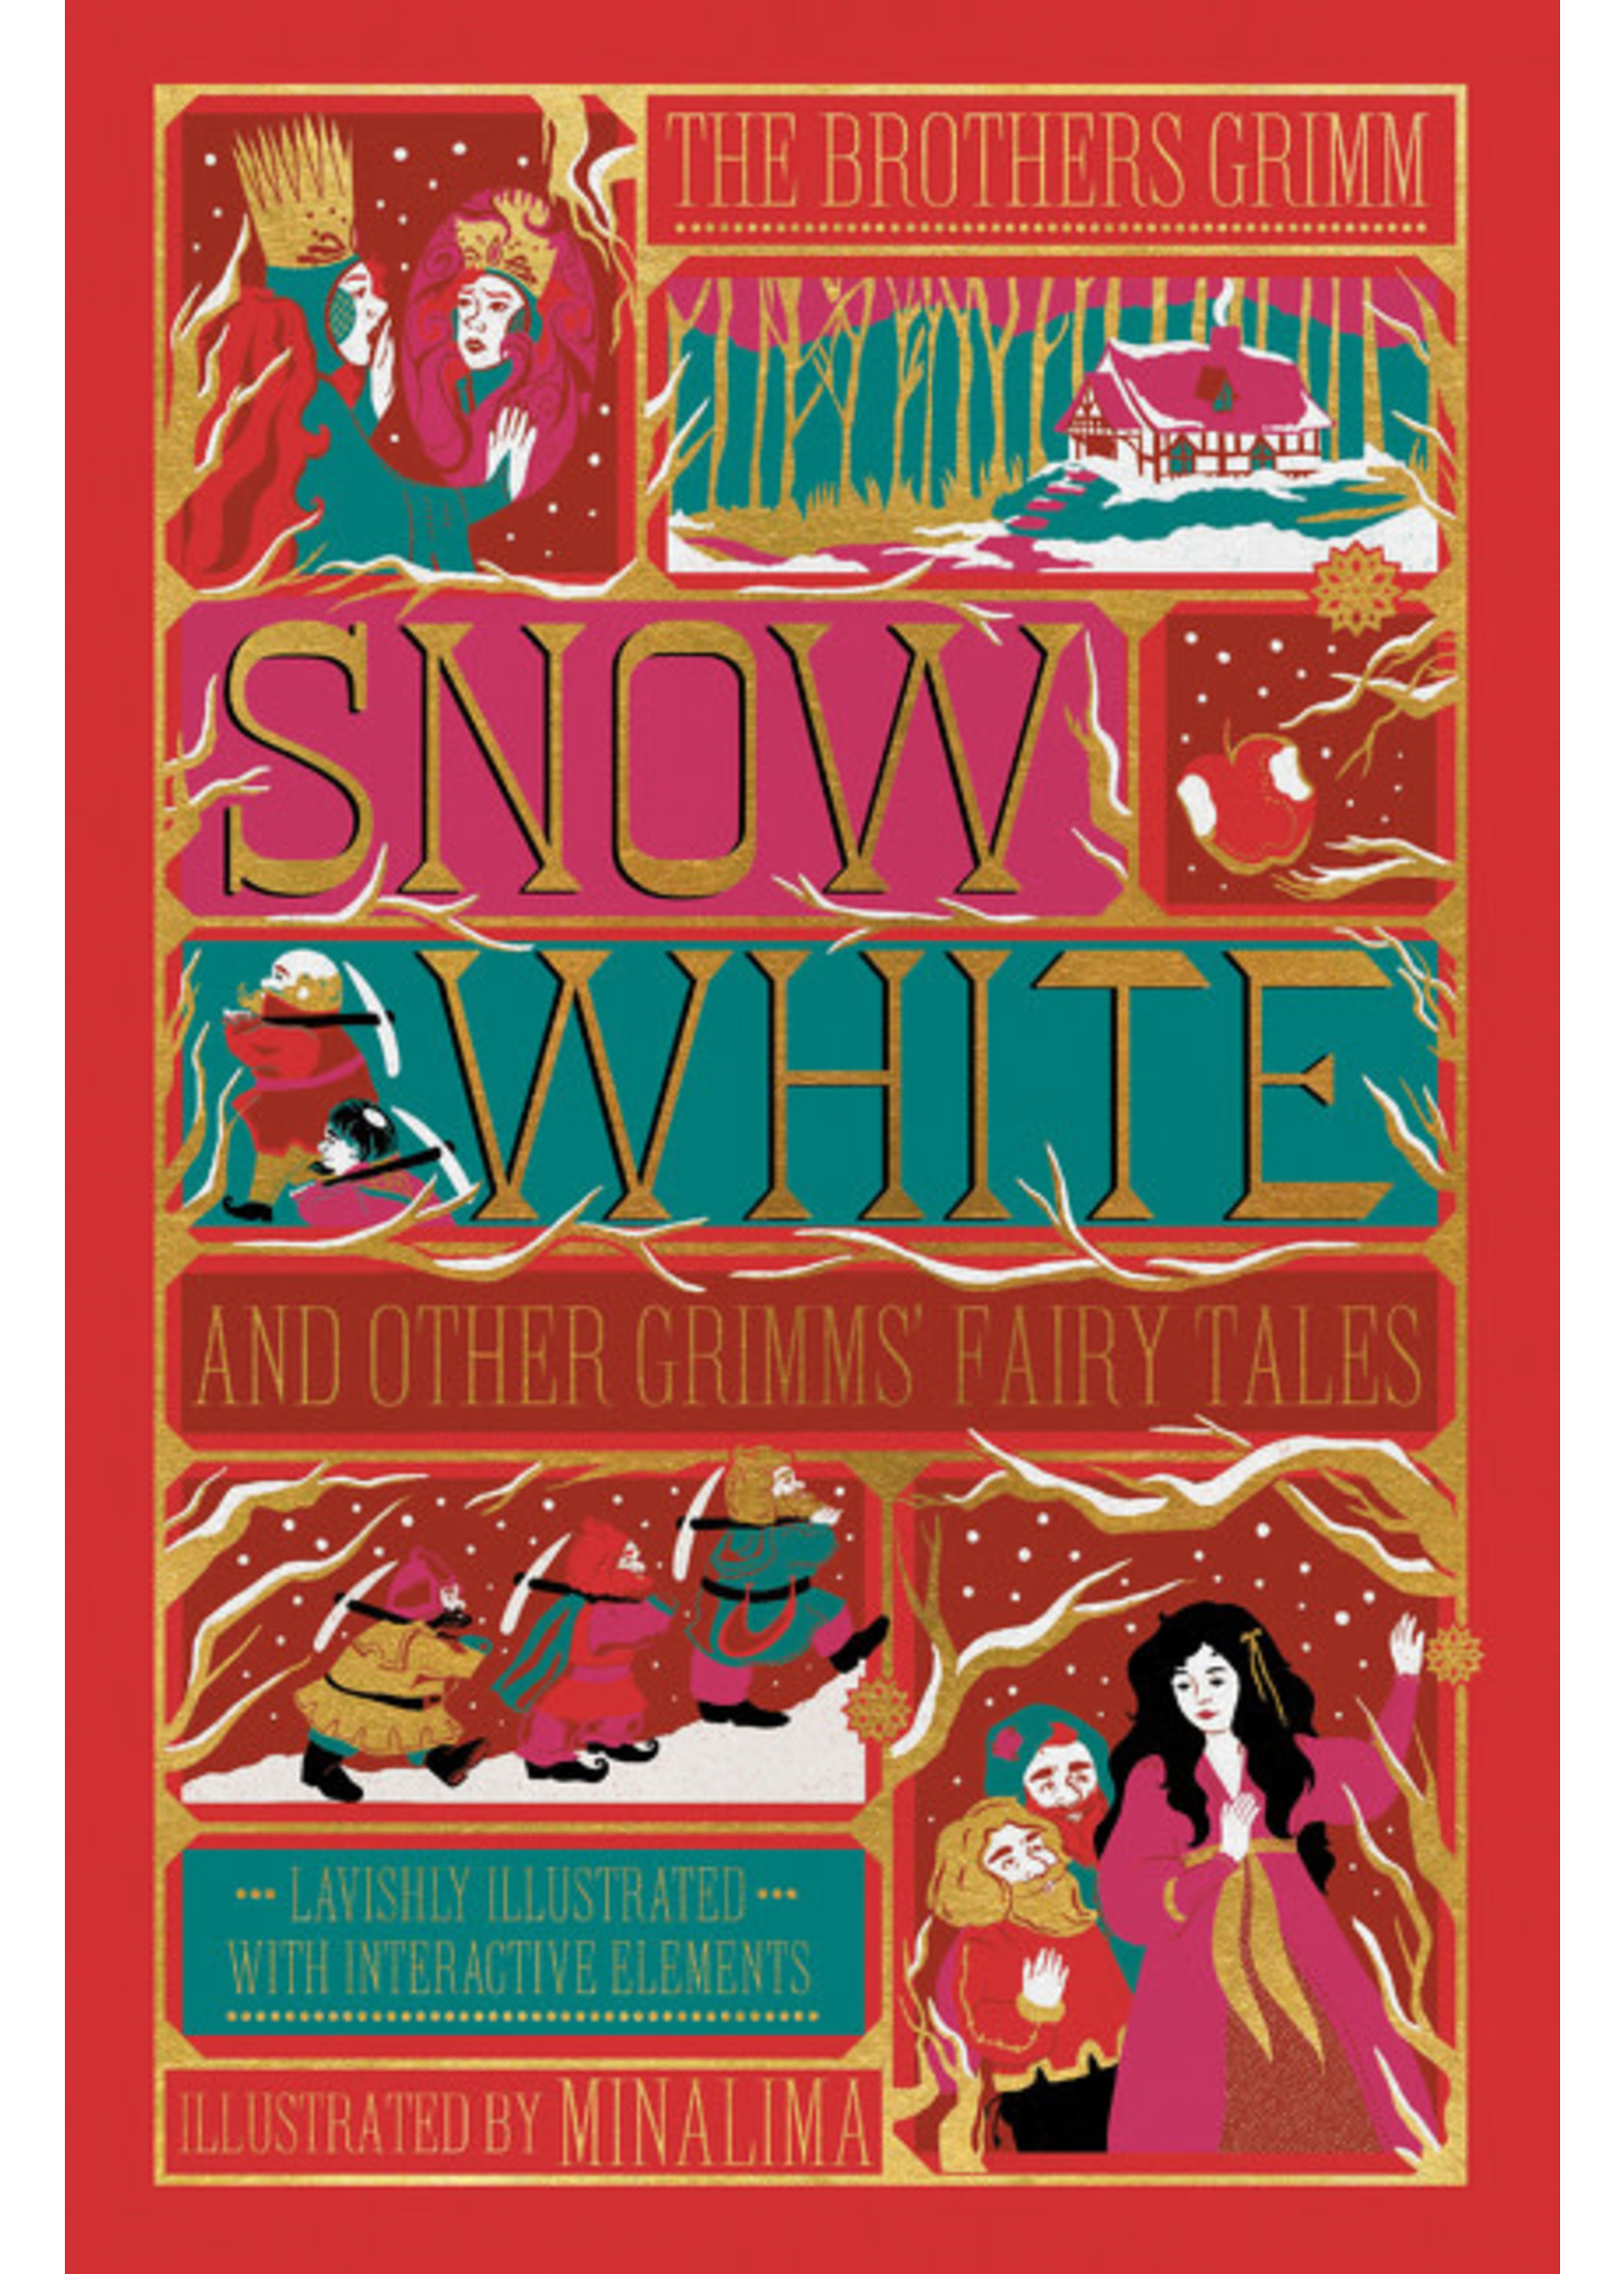 Snow White and Other Grimms' Fairy Tales: Illustrated with Interactive Elements by Jacob and Wilhelm Grimm